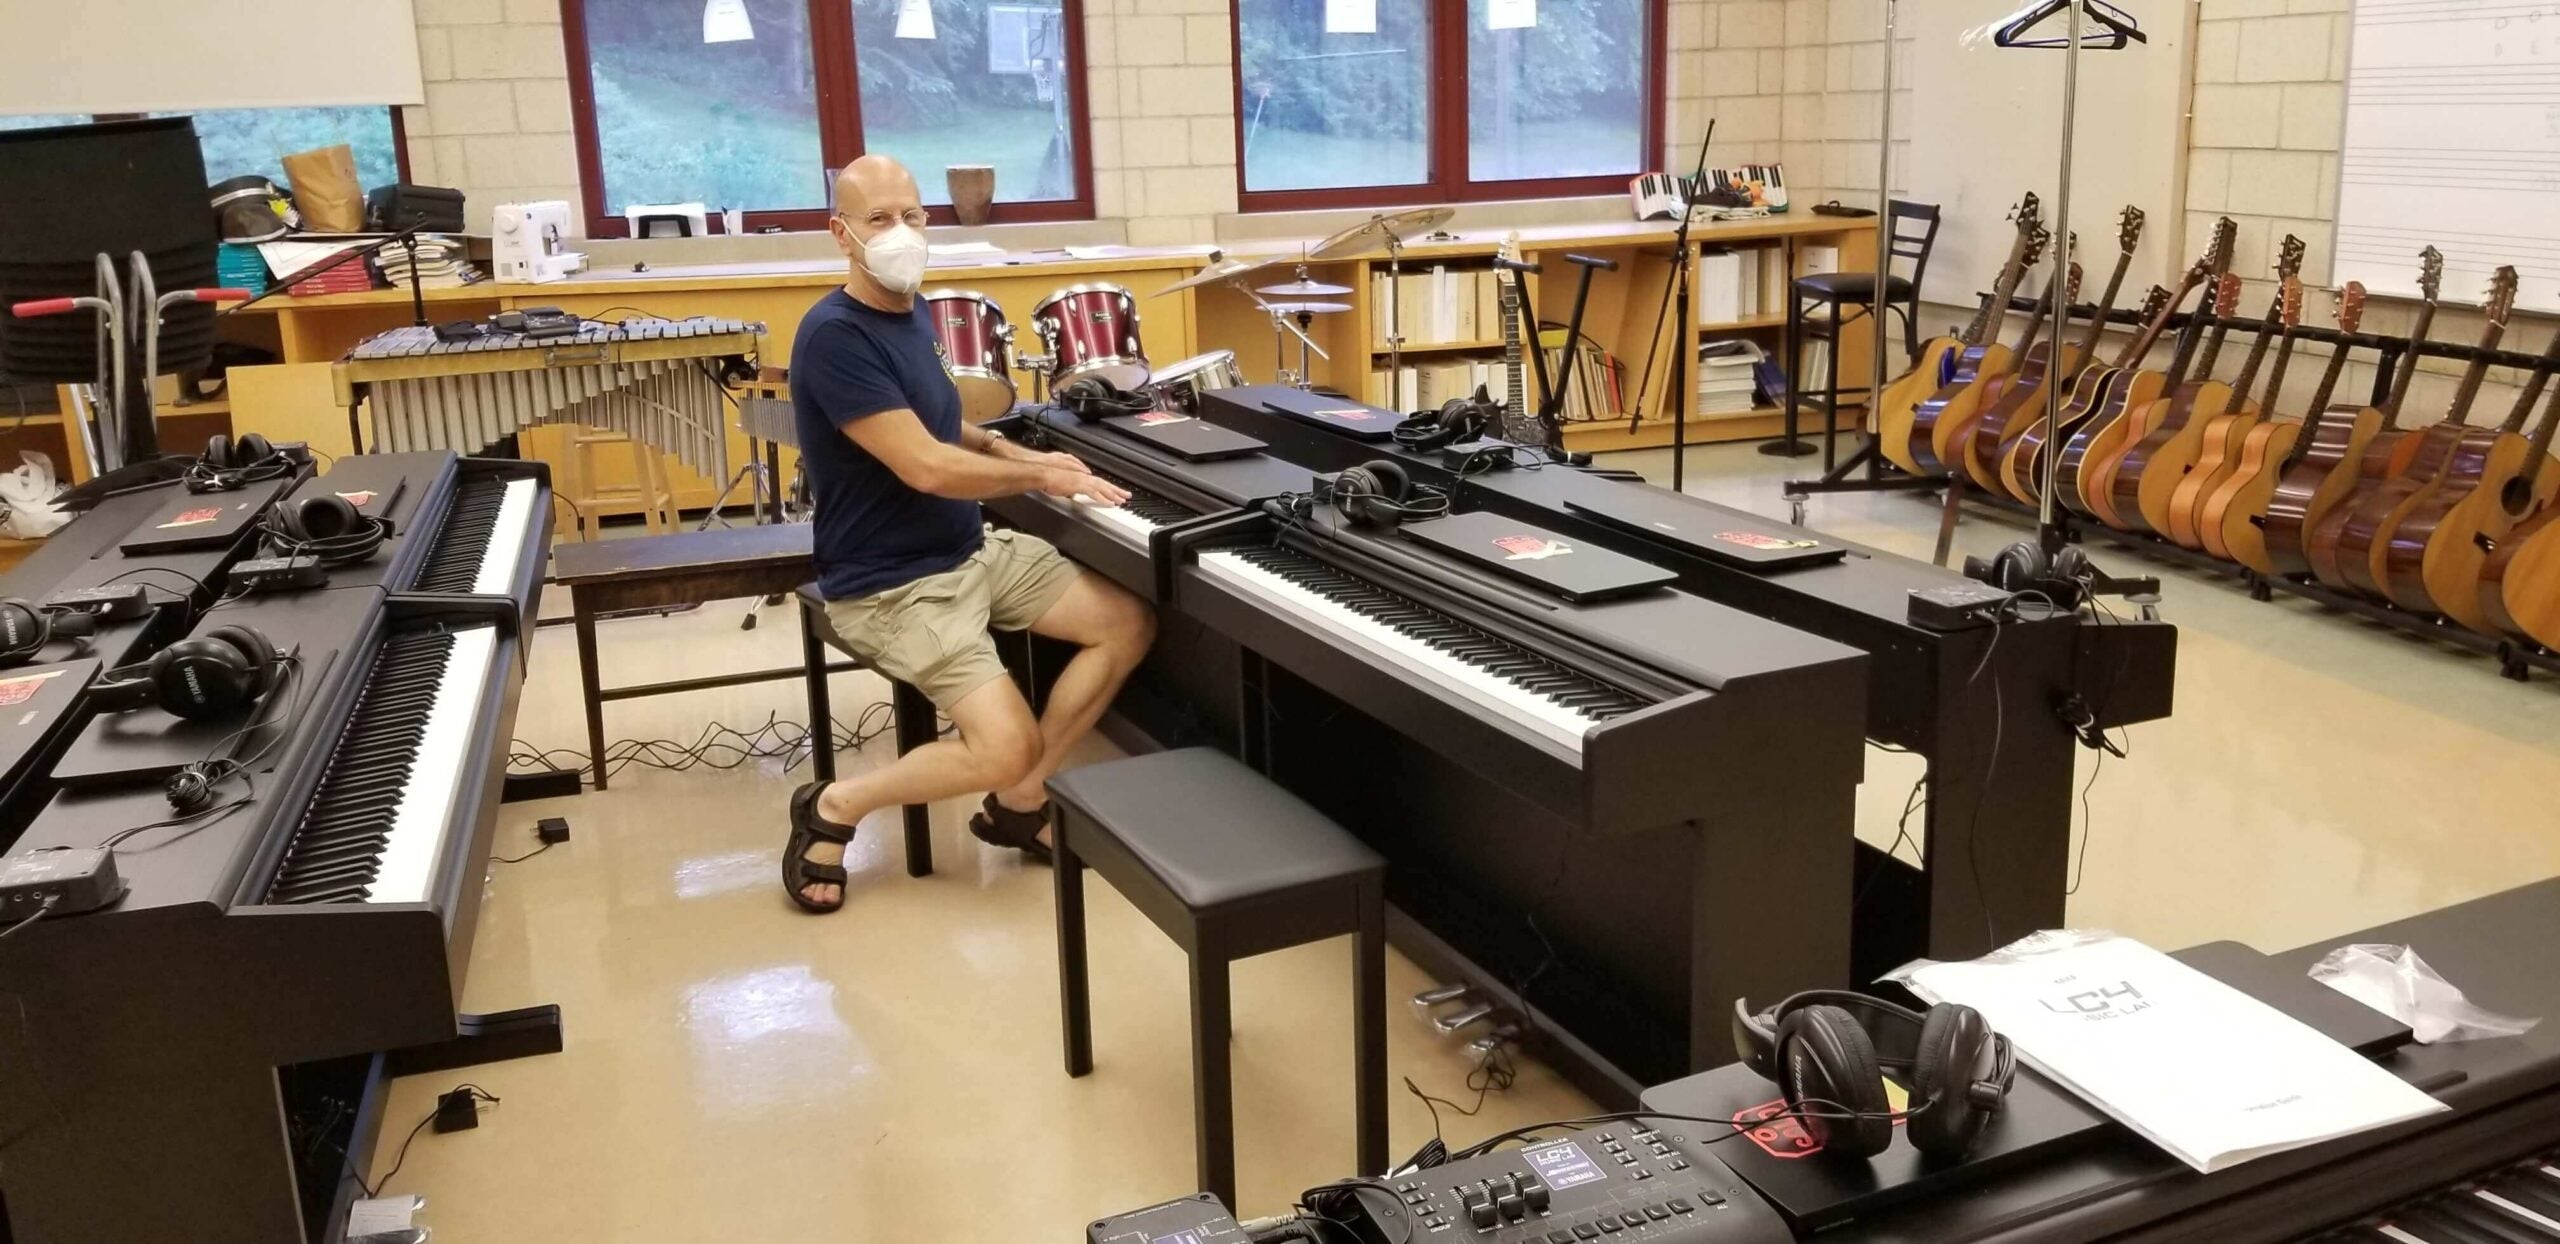 Man in a room full of pianos and guitars